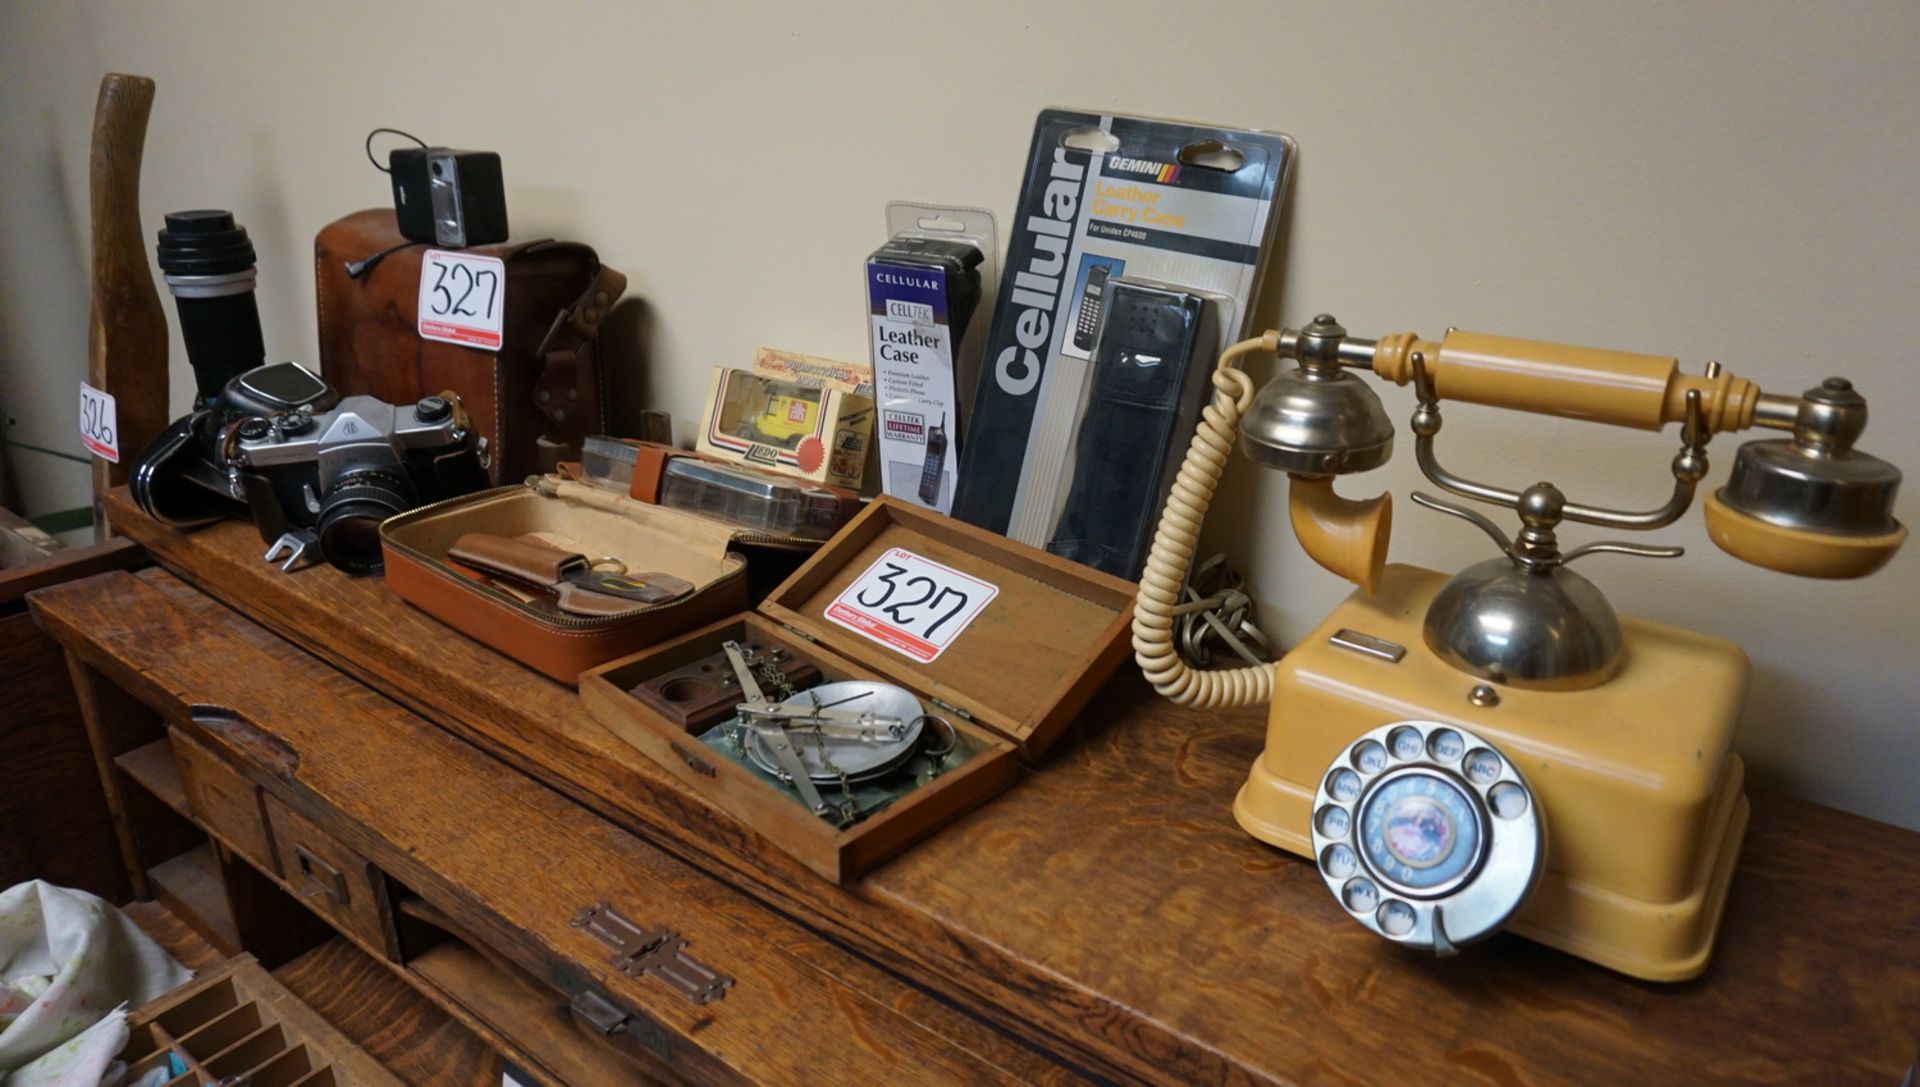 LOT - VINTAGE CAMERA, TELEPHONES, COIN COLLECTIONS, ETC.